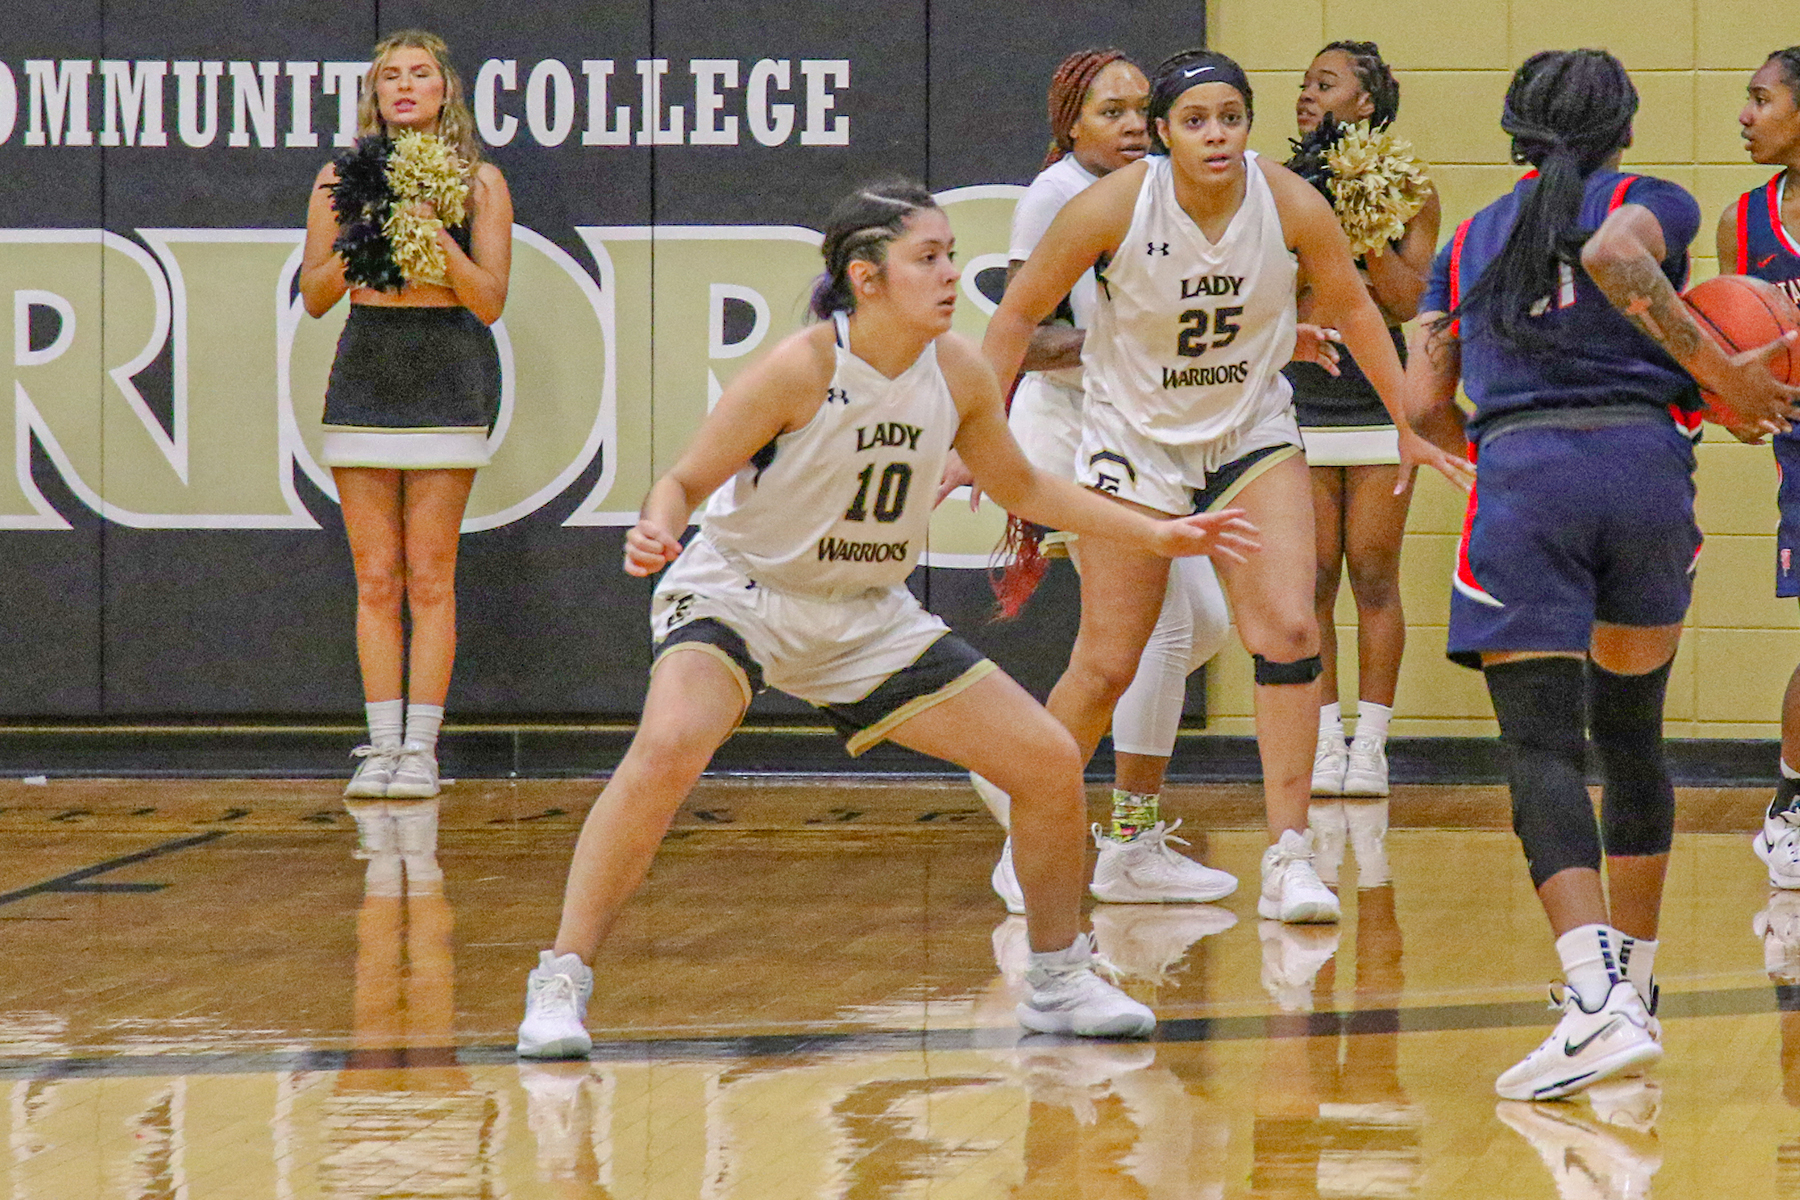 Lady Rangers Secure Win With Second Half Comeback